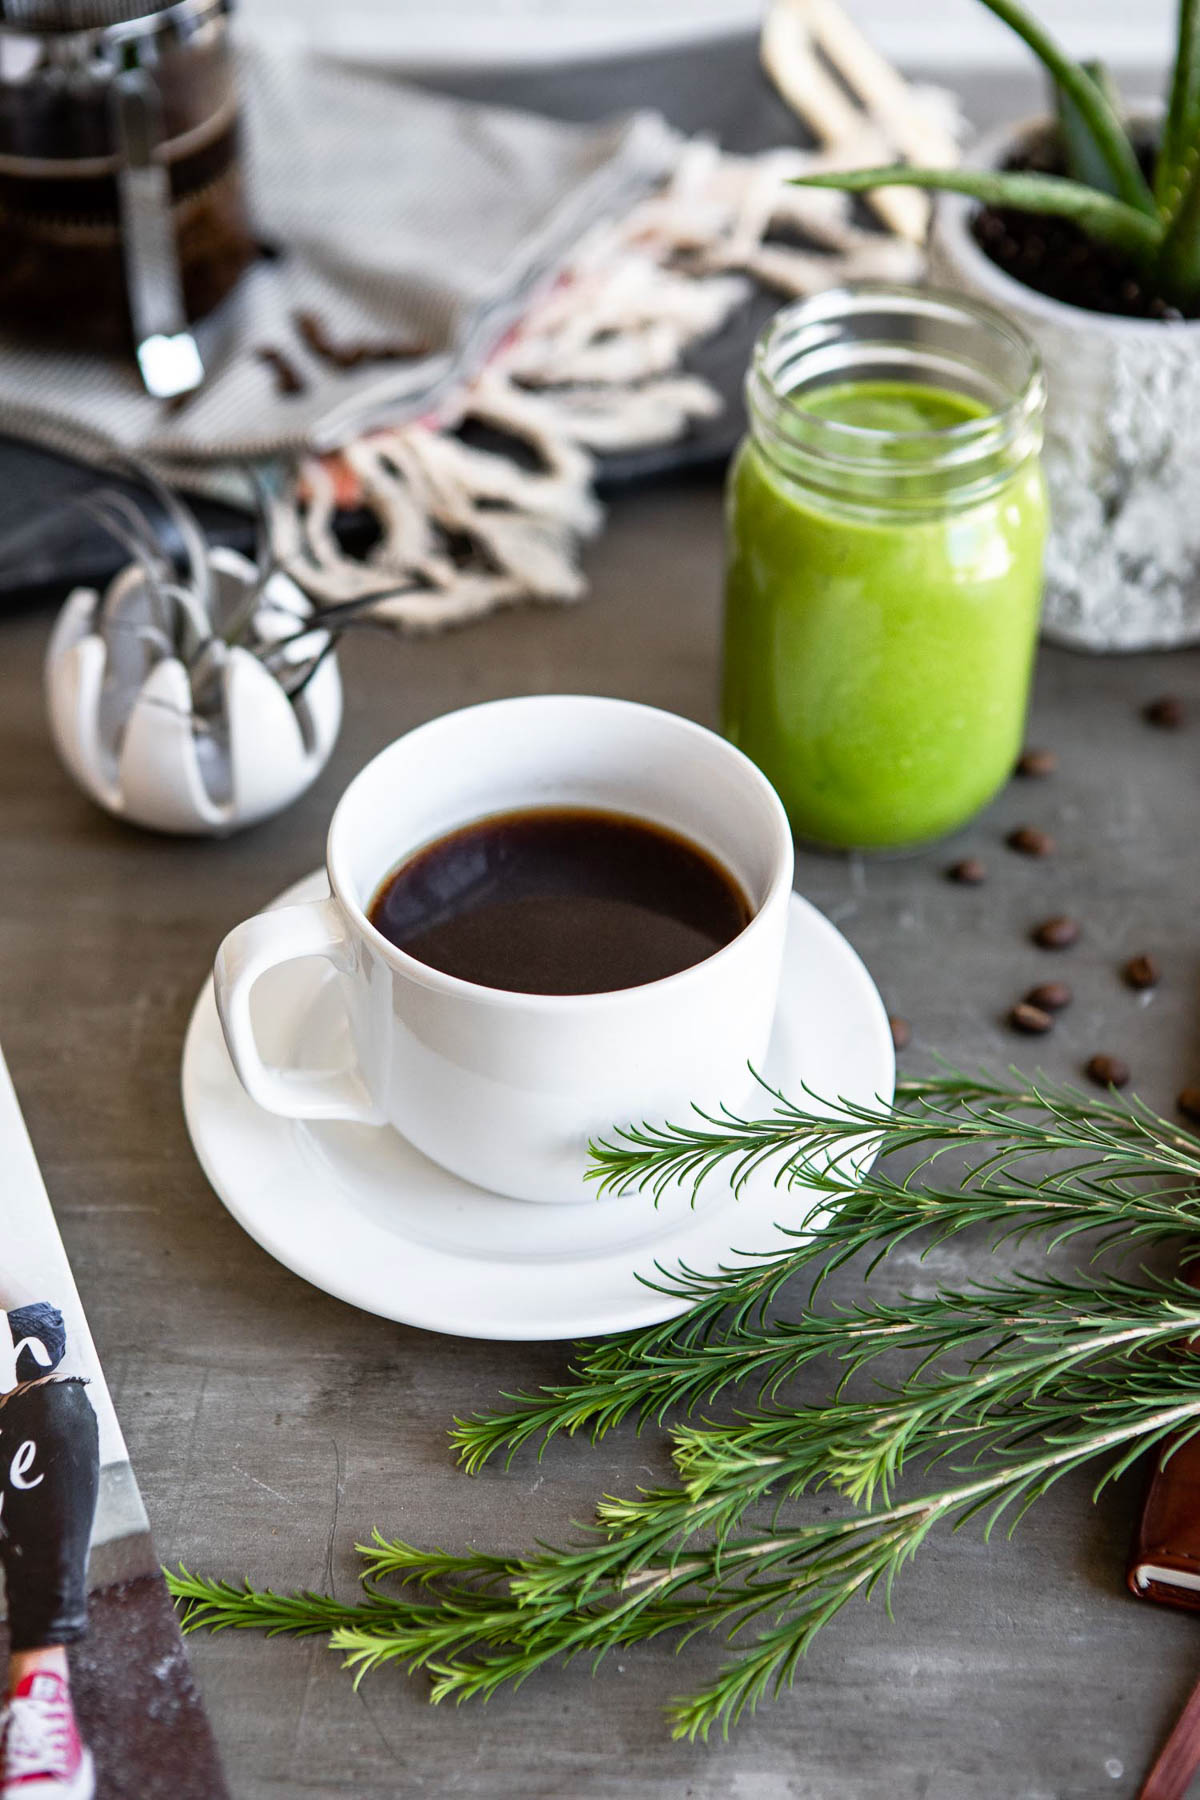 healthy coffee in a white cup on a white plate next to a jar of green smoothie.